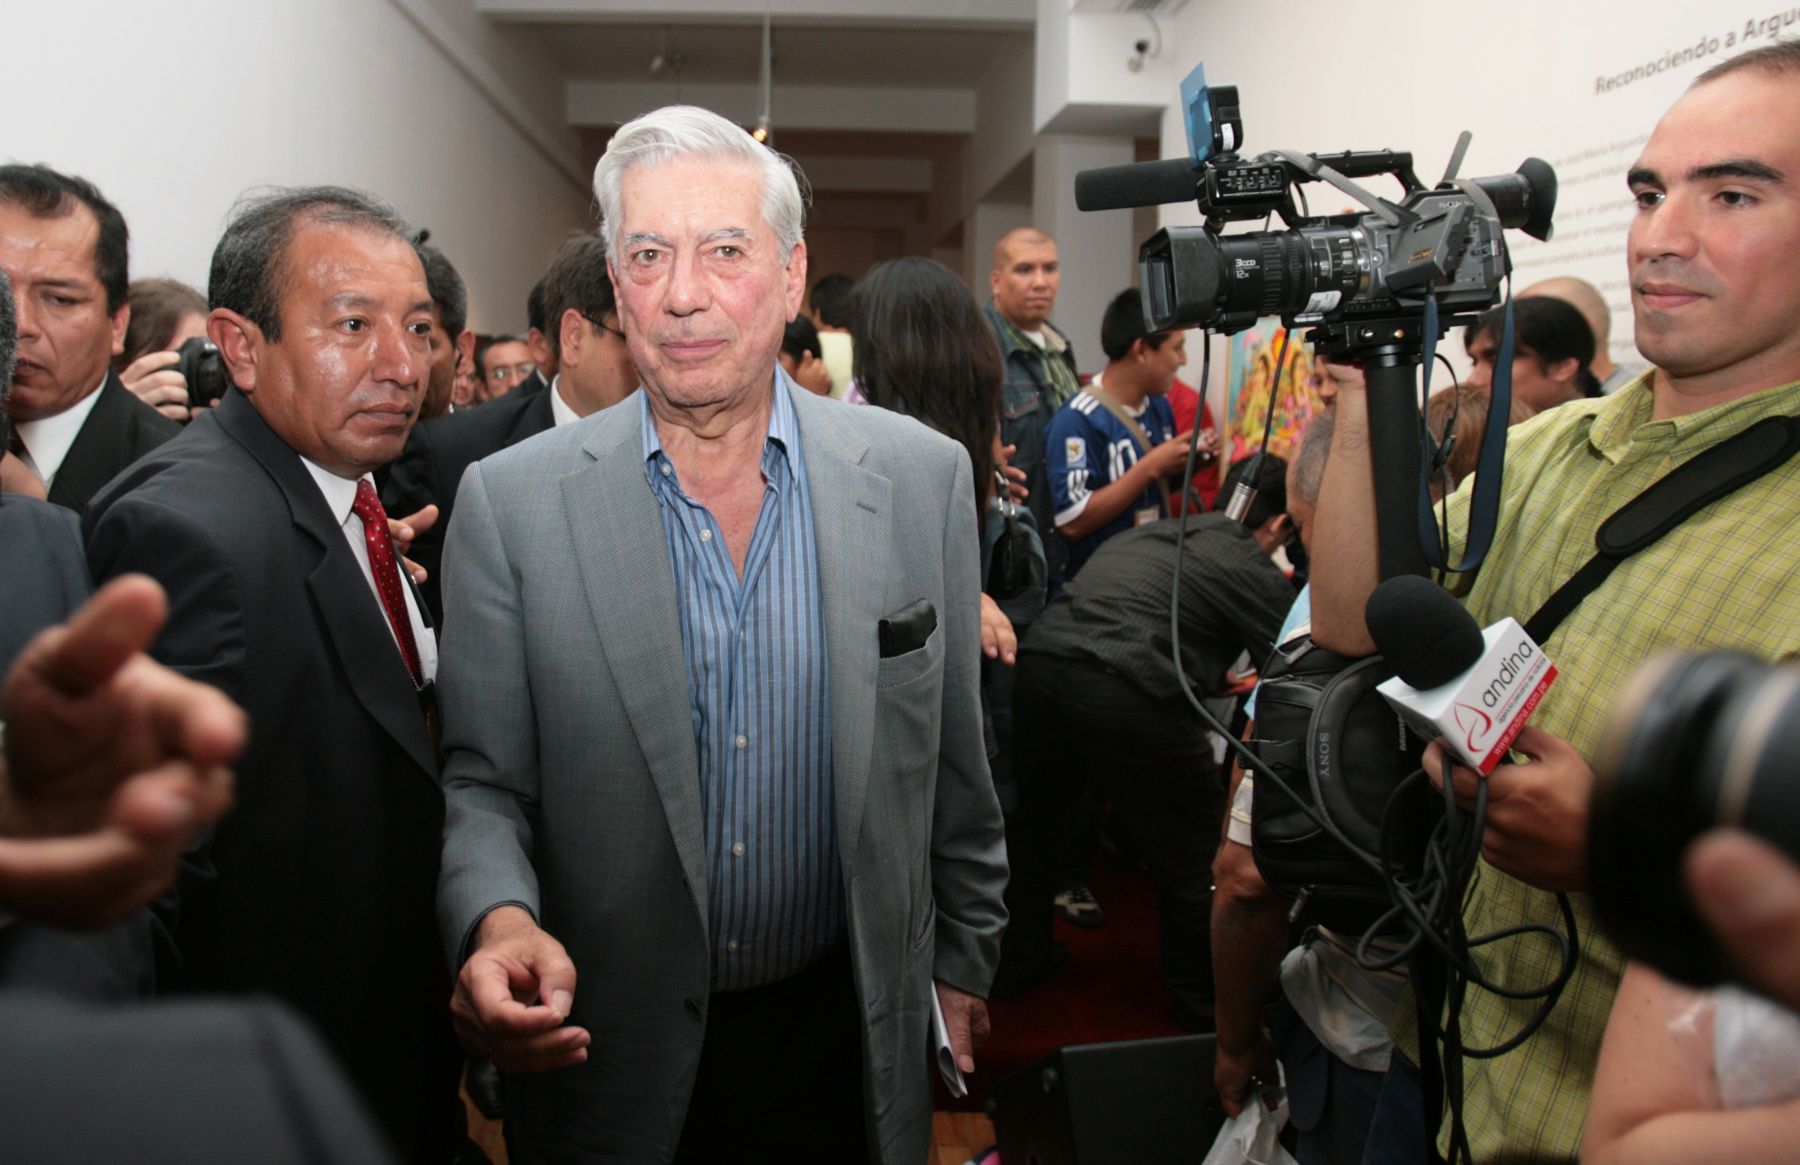 Mario Vargas Llosa, the most distinguished living Peruvian writer and the 2010 Nobel Laureate.